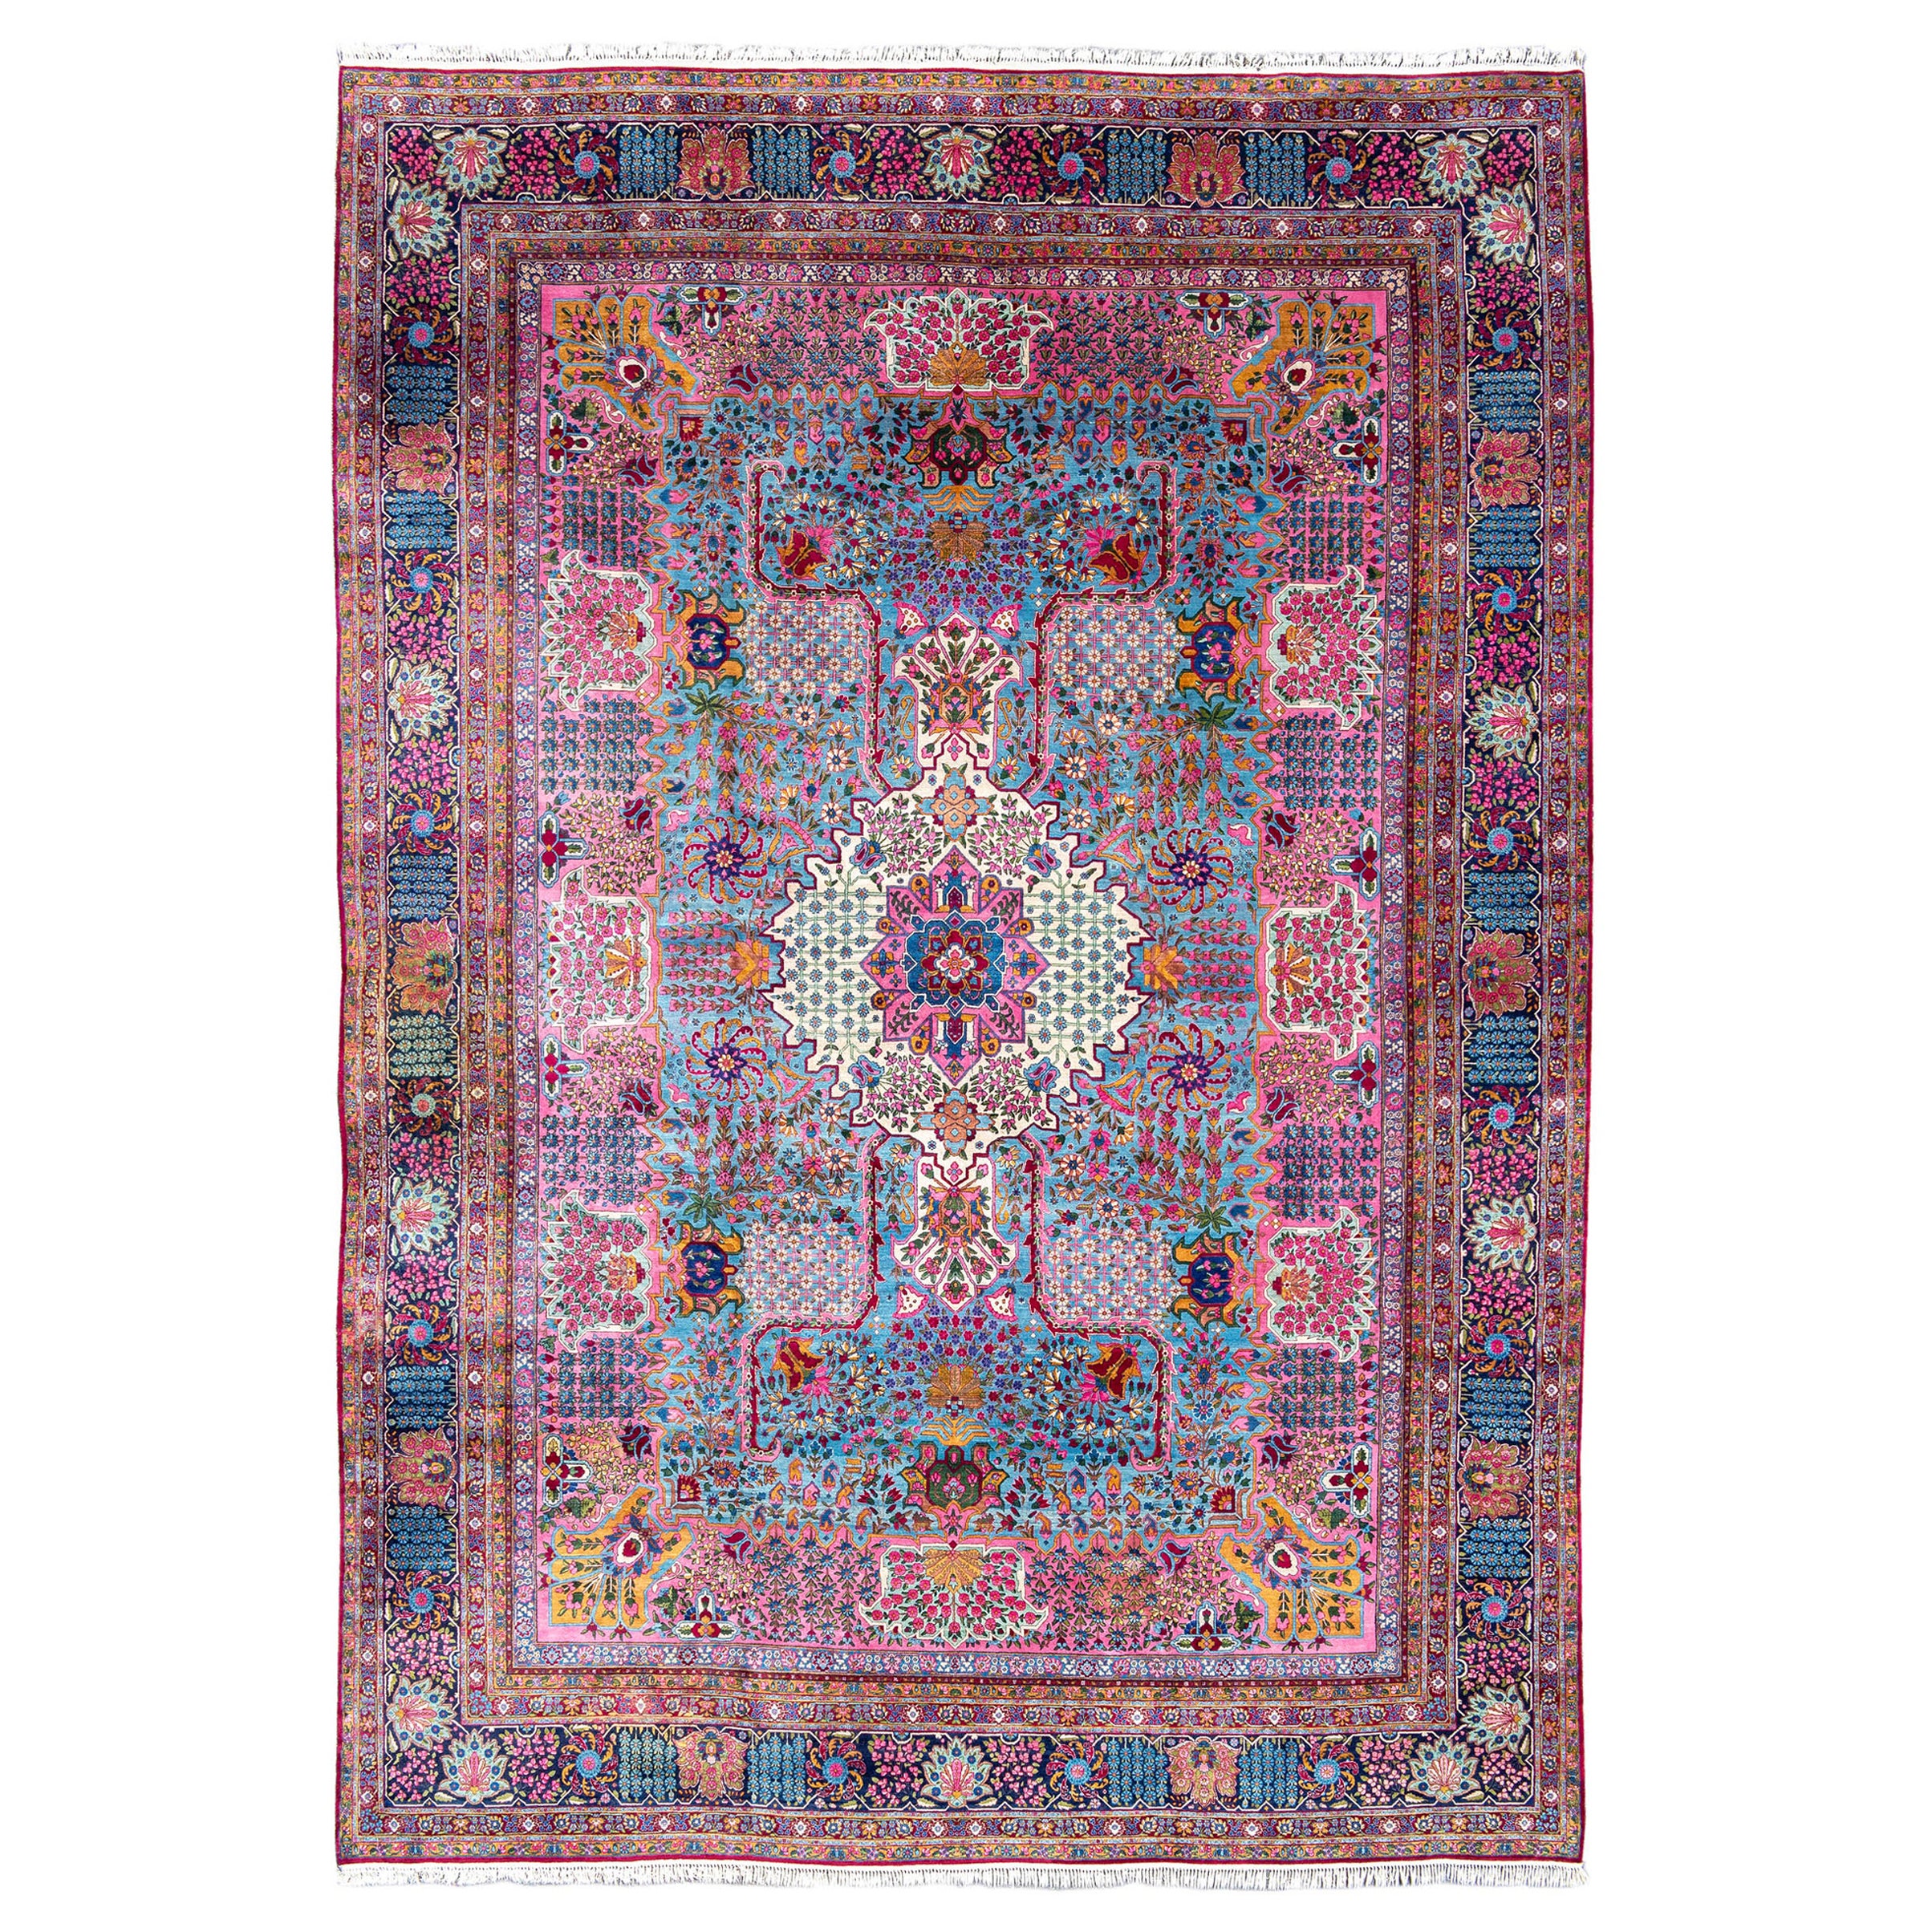 Antique Large Persian Kirman Carpet, Early 20th century For Sale